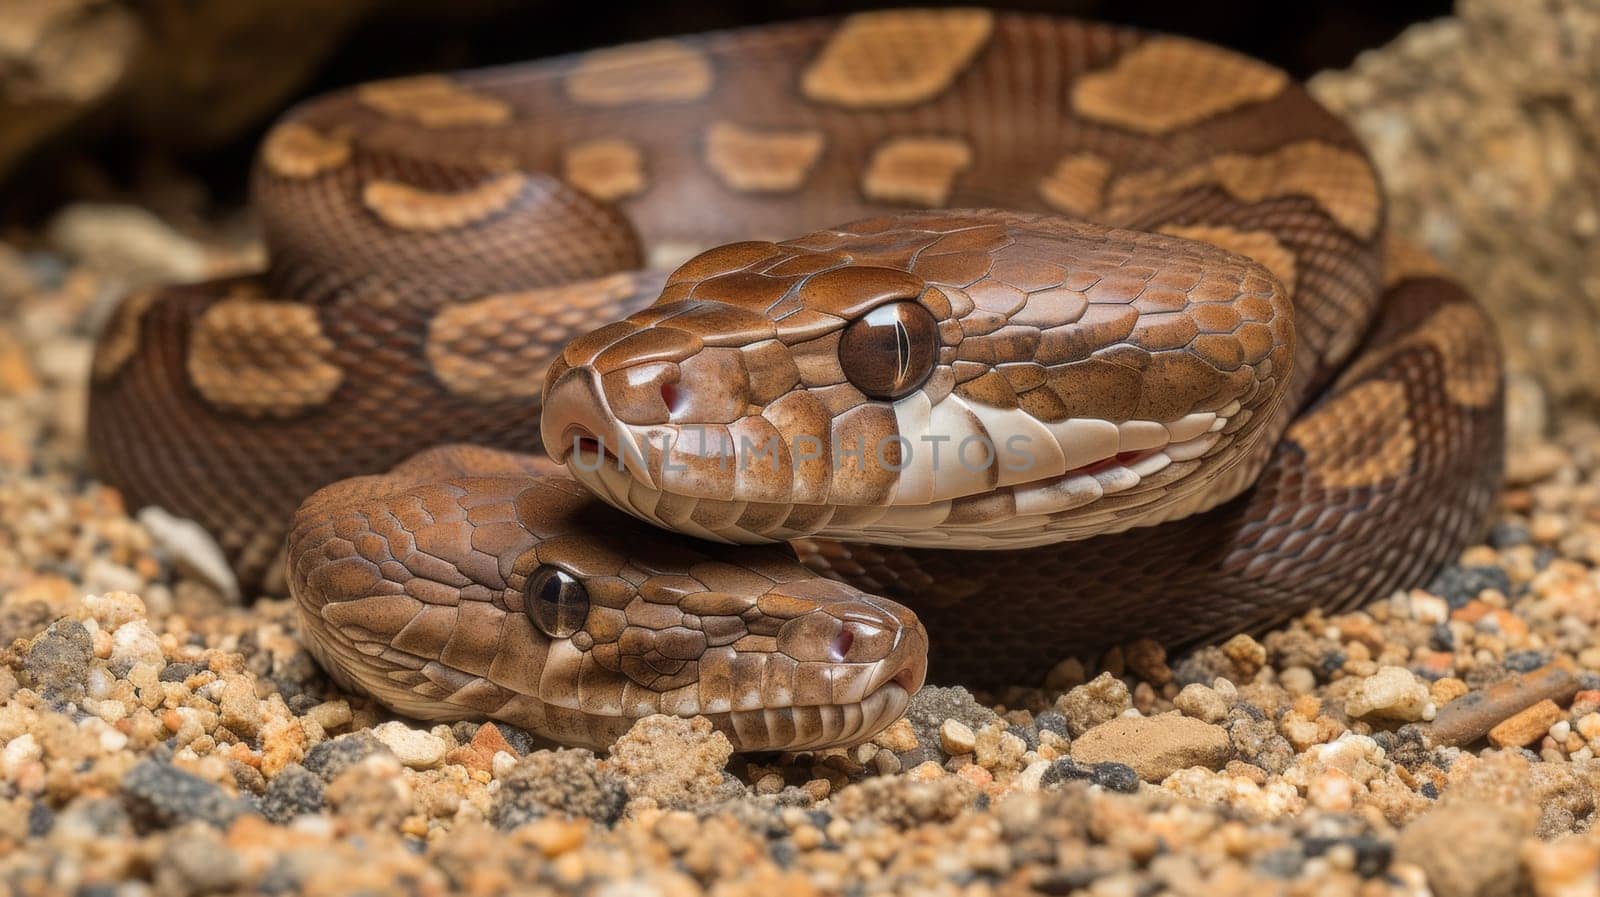 Two snakes are laying on top of each other in the sand